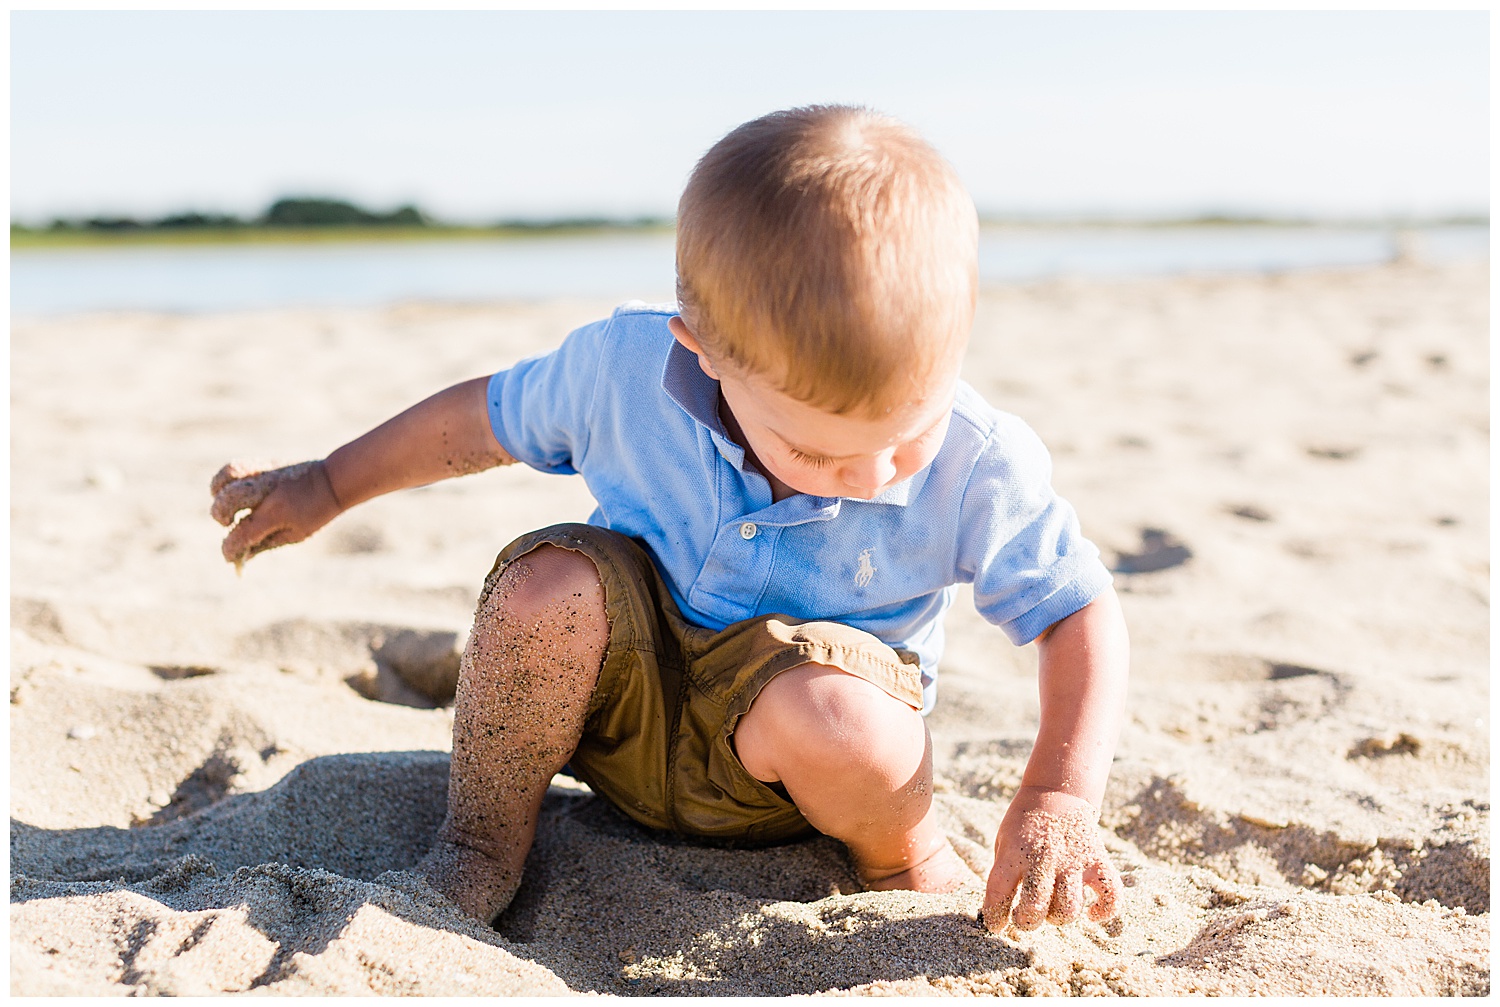 sandy toddler playing on beach